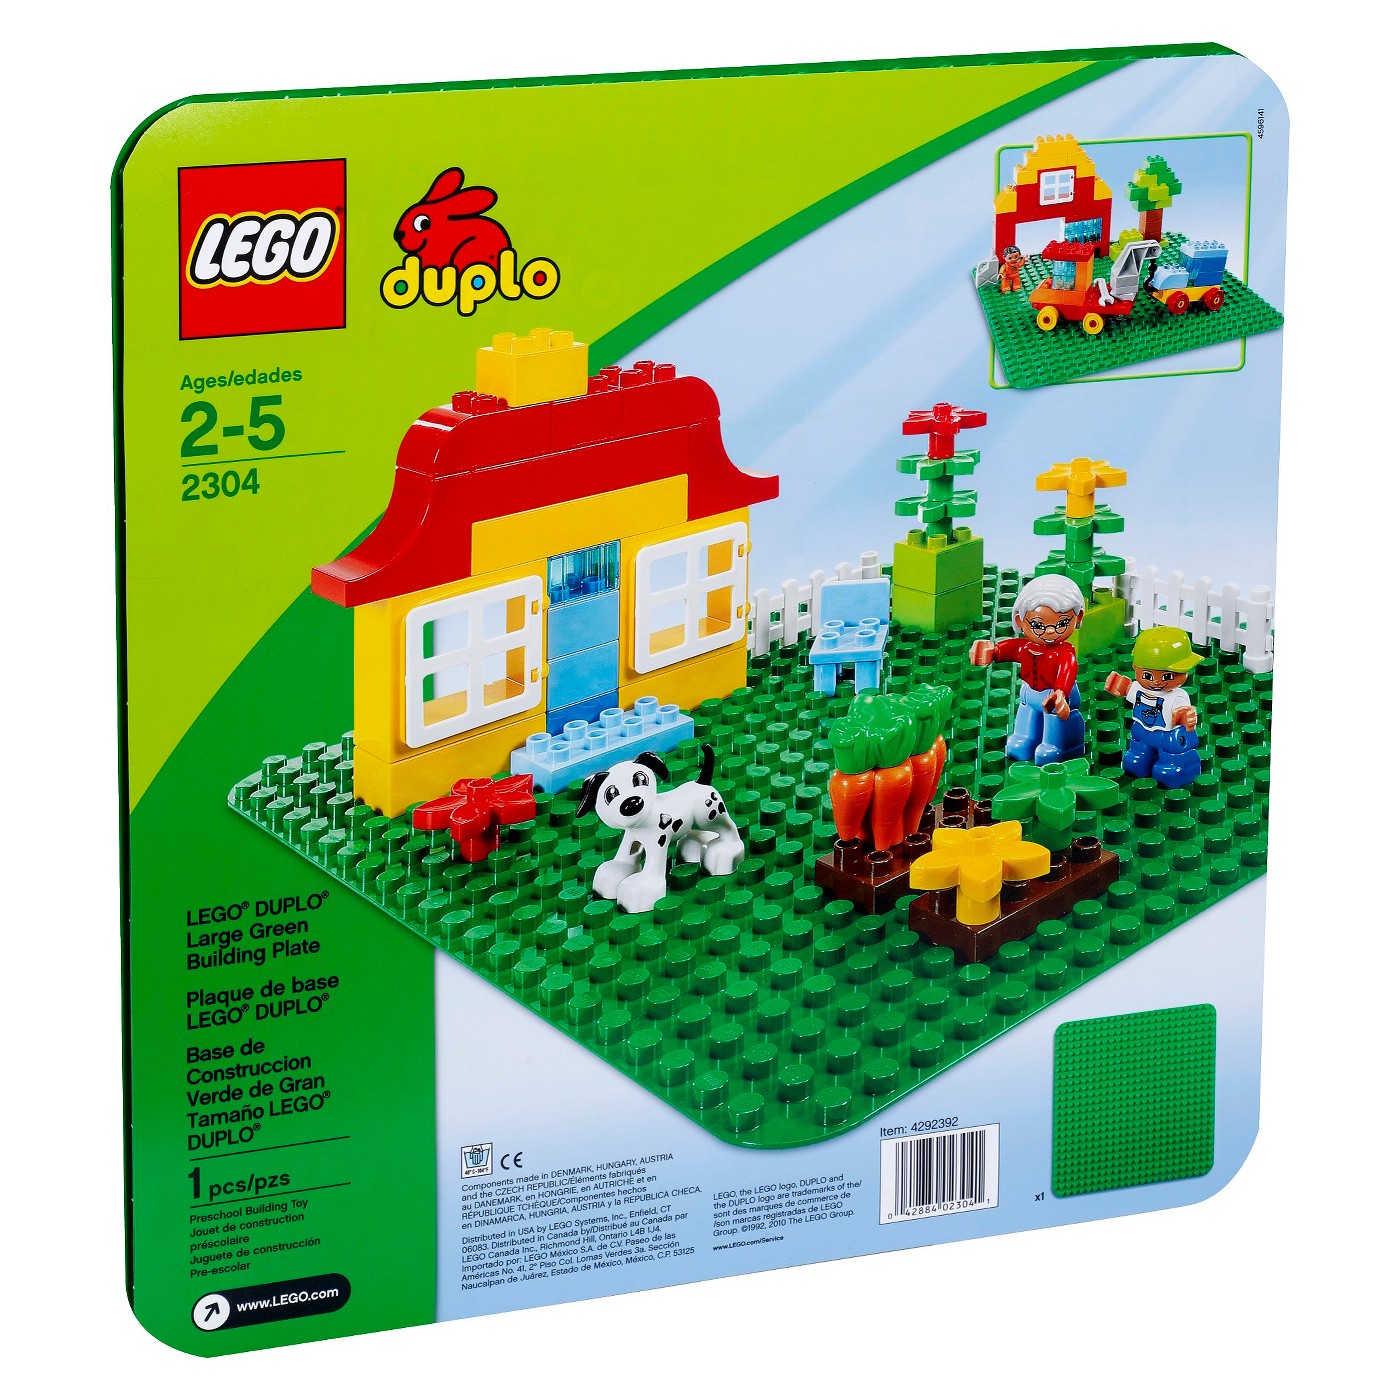 LEGOÂ® DUPLOÂ® My First Large Green Building Plate 2304 - image 1 of 3